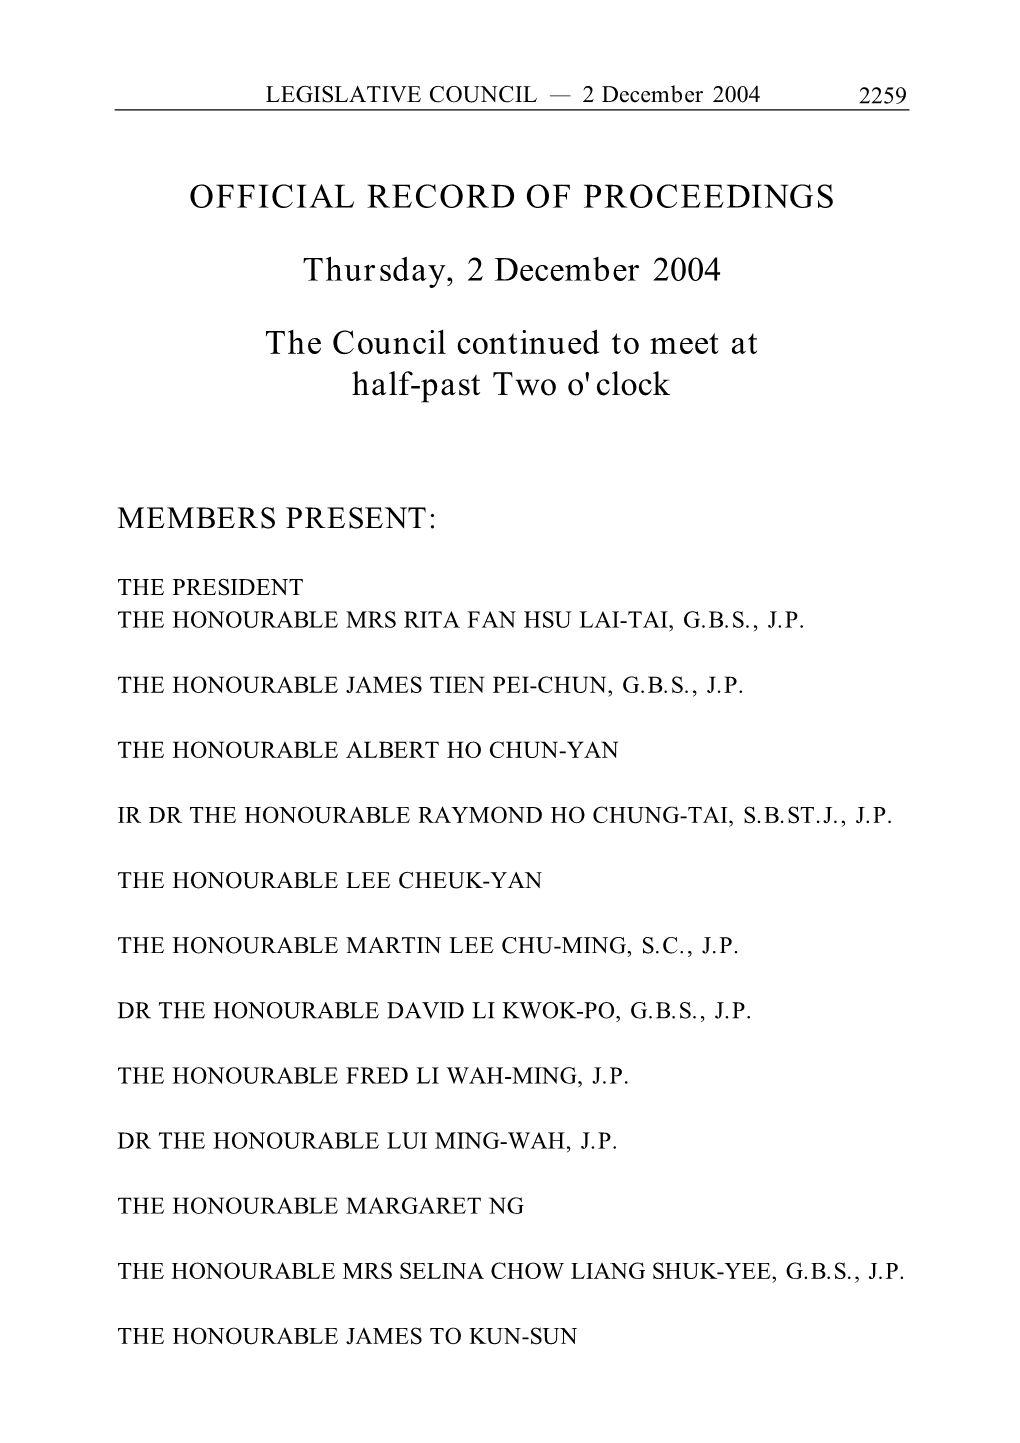 Thursday, 2 December 2004 the Council Continued to Meet at Half